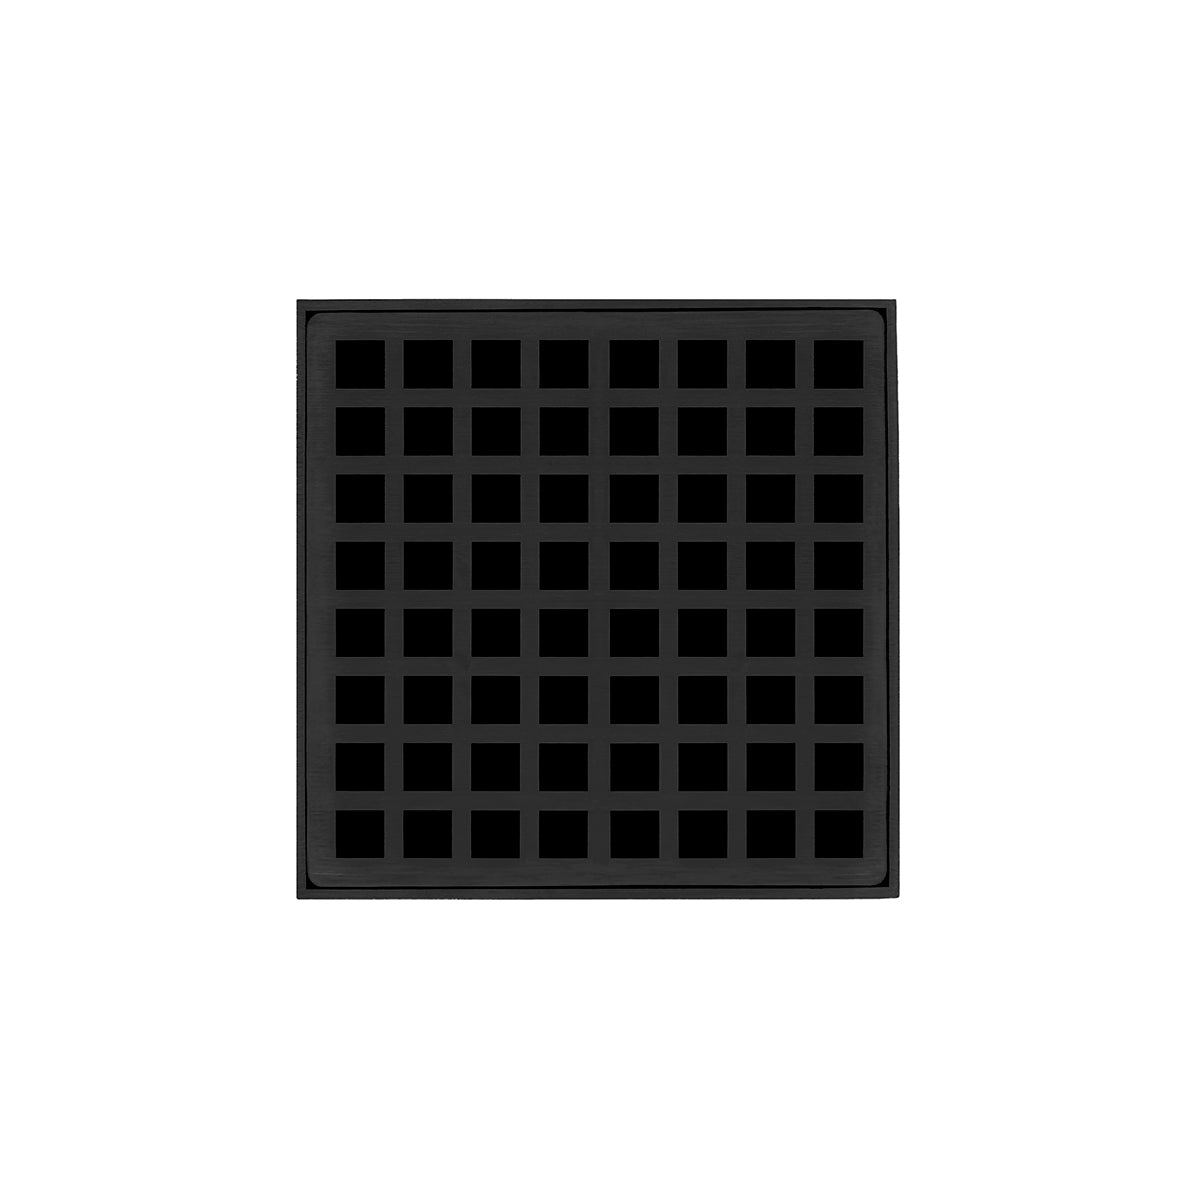 Infinity Drain 5" x 5" QD 5 High Flow Premium Center Drain Kit with Squares Pattern Decorative Plate with Cast Iron Drain Body, 3" No-Hub Outlet